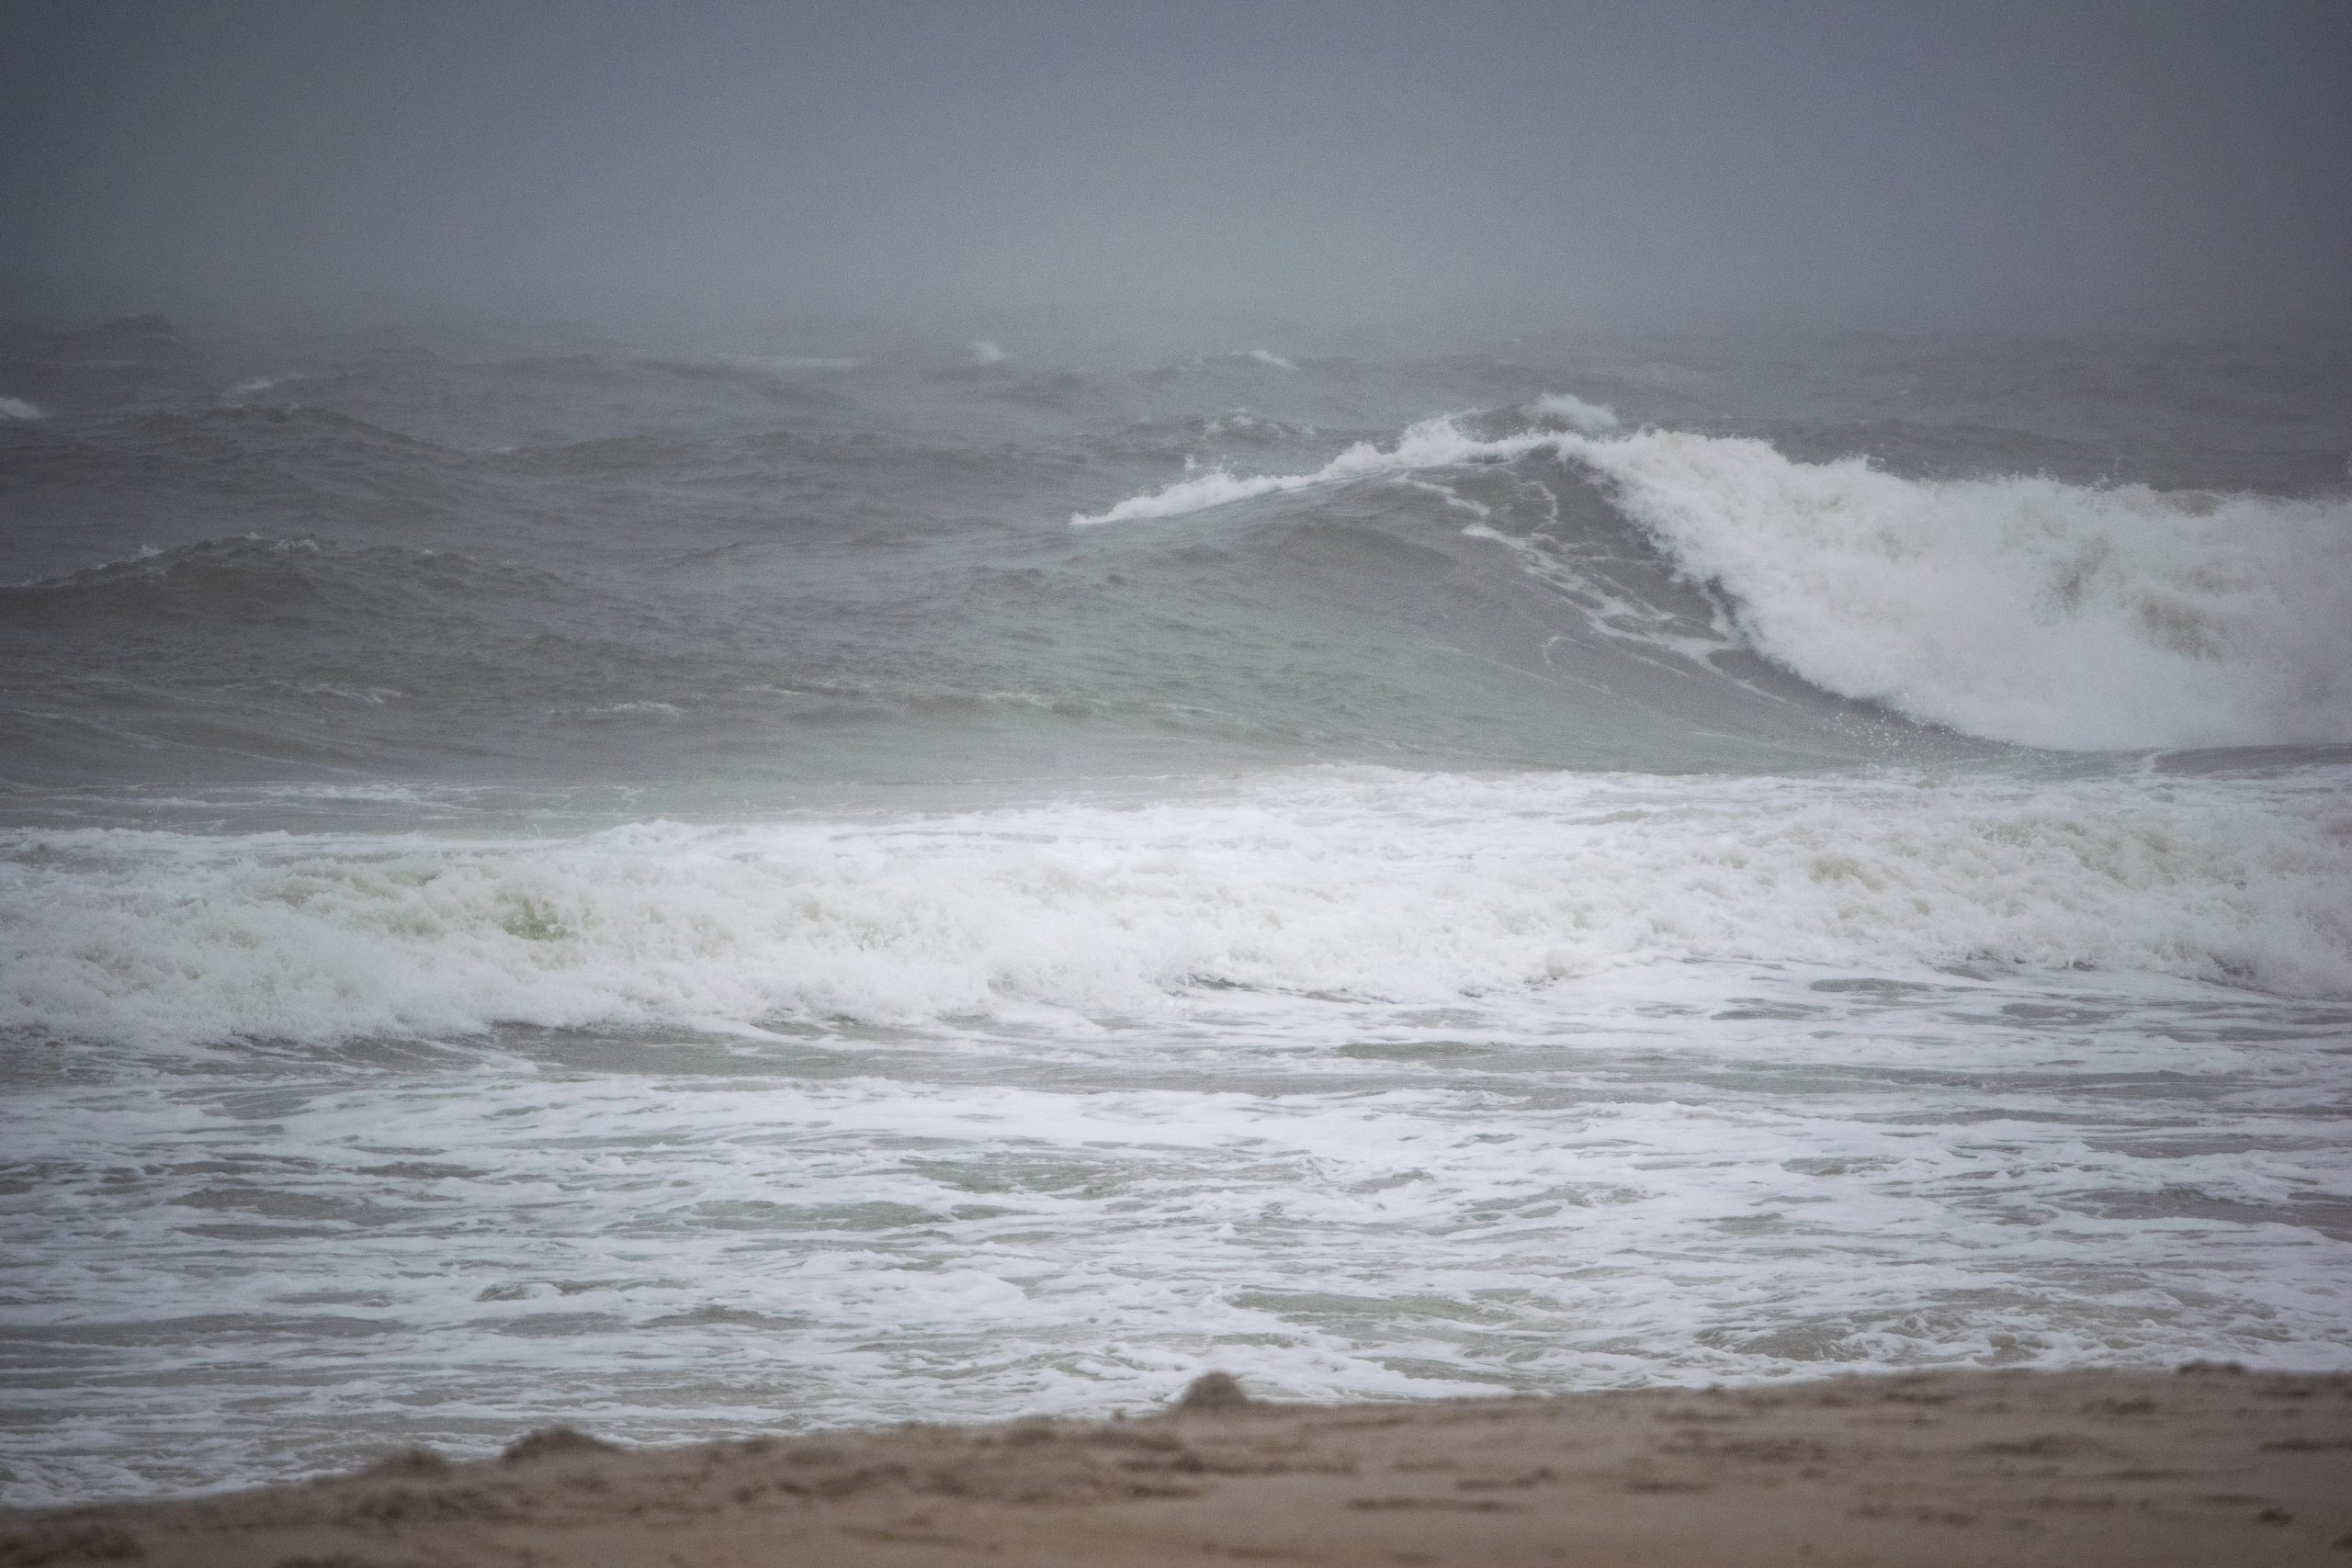 Heavy surf generated by the remnants of Hurricane Ian, Oct. 1, 2022. (Photo: Daniel Nee)